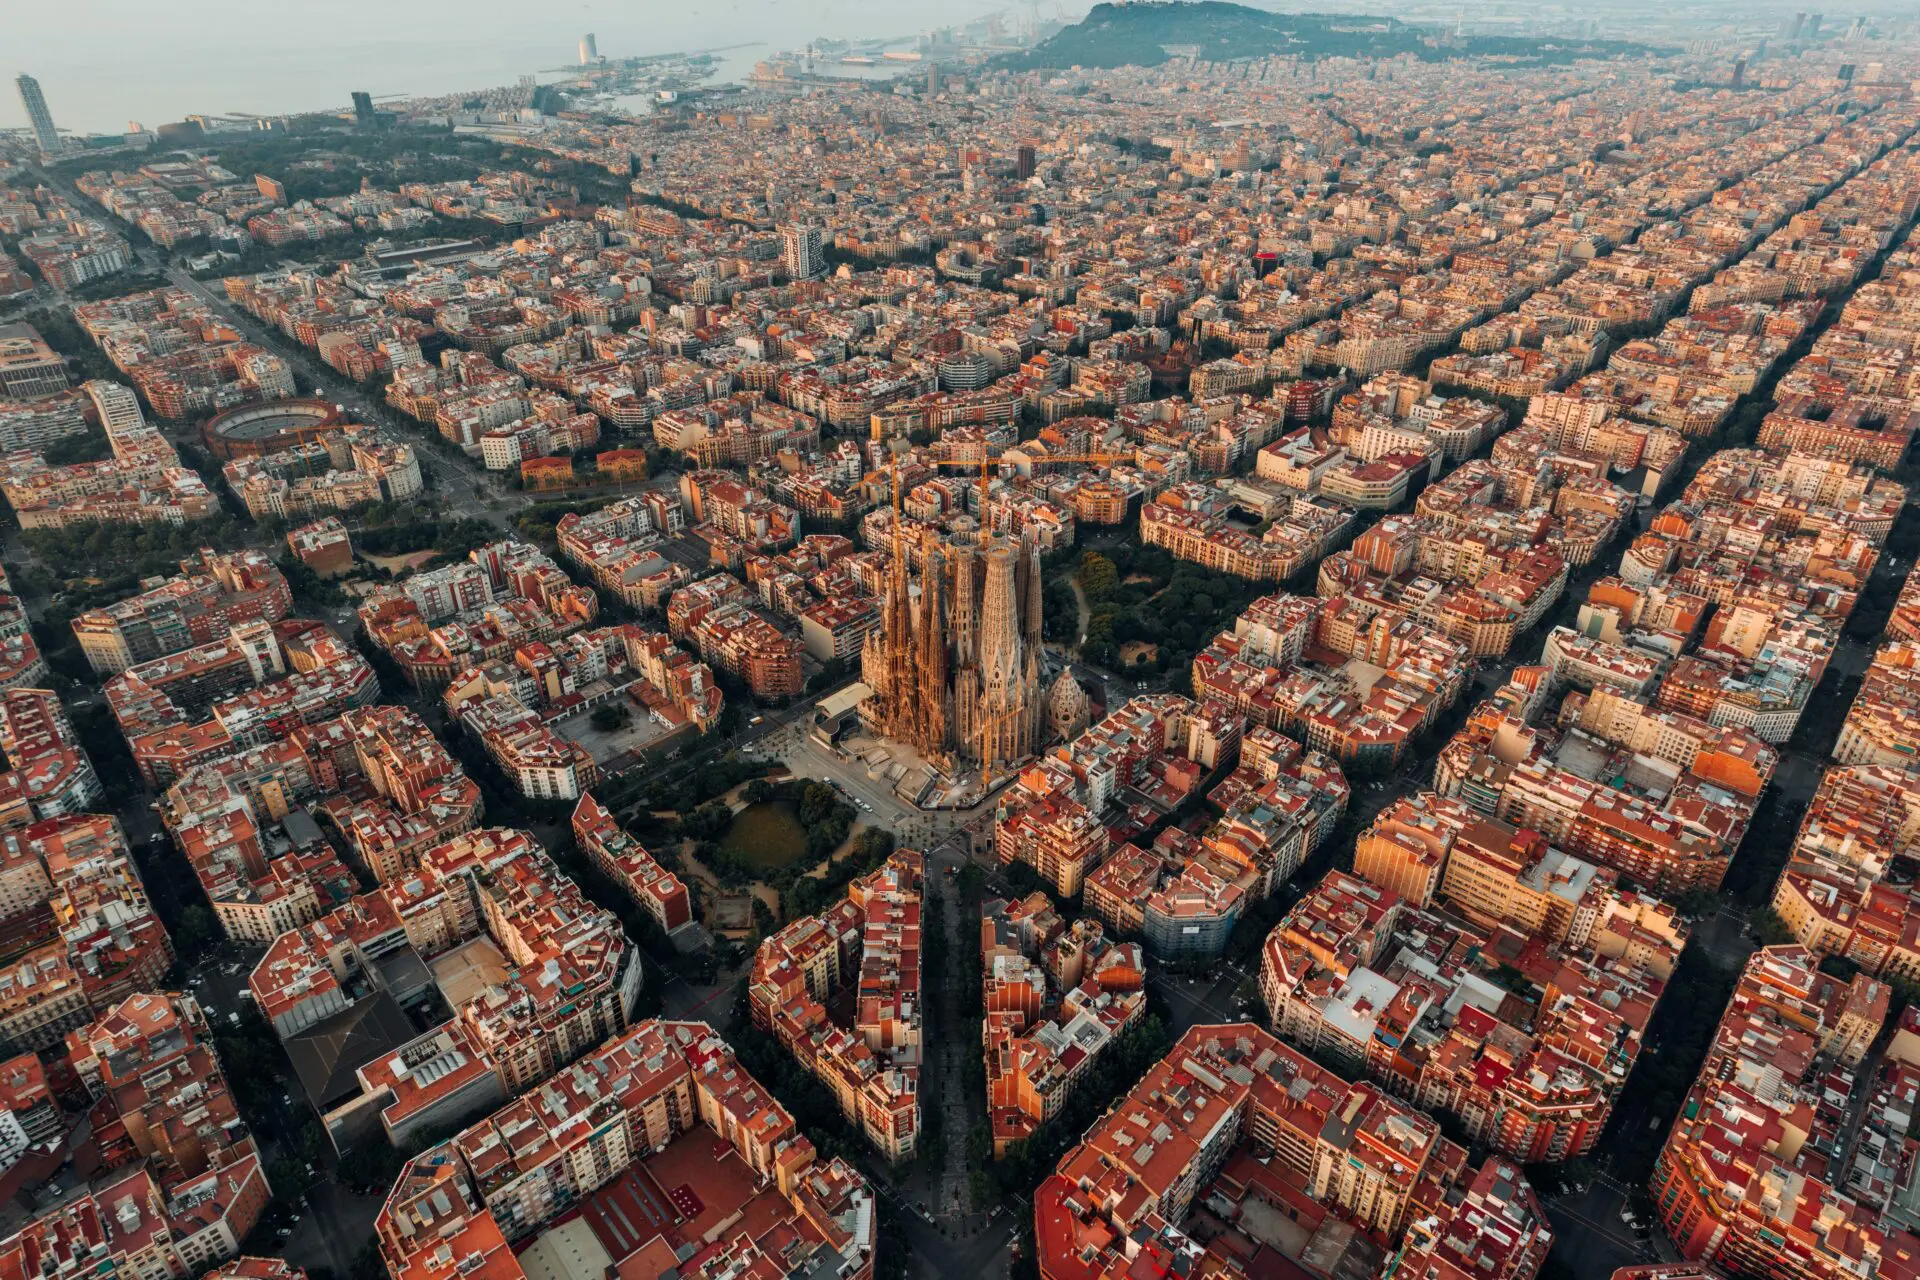 Birdseye view of the city of Barcelona with La Sagrada Familia a central viewpoint